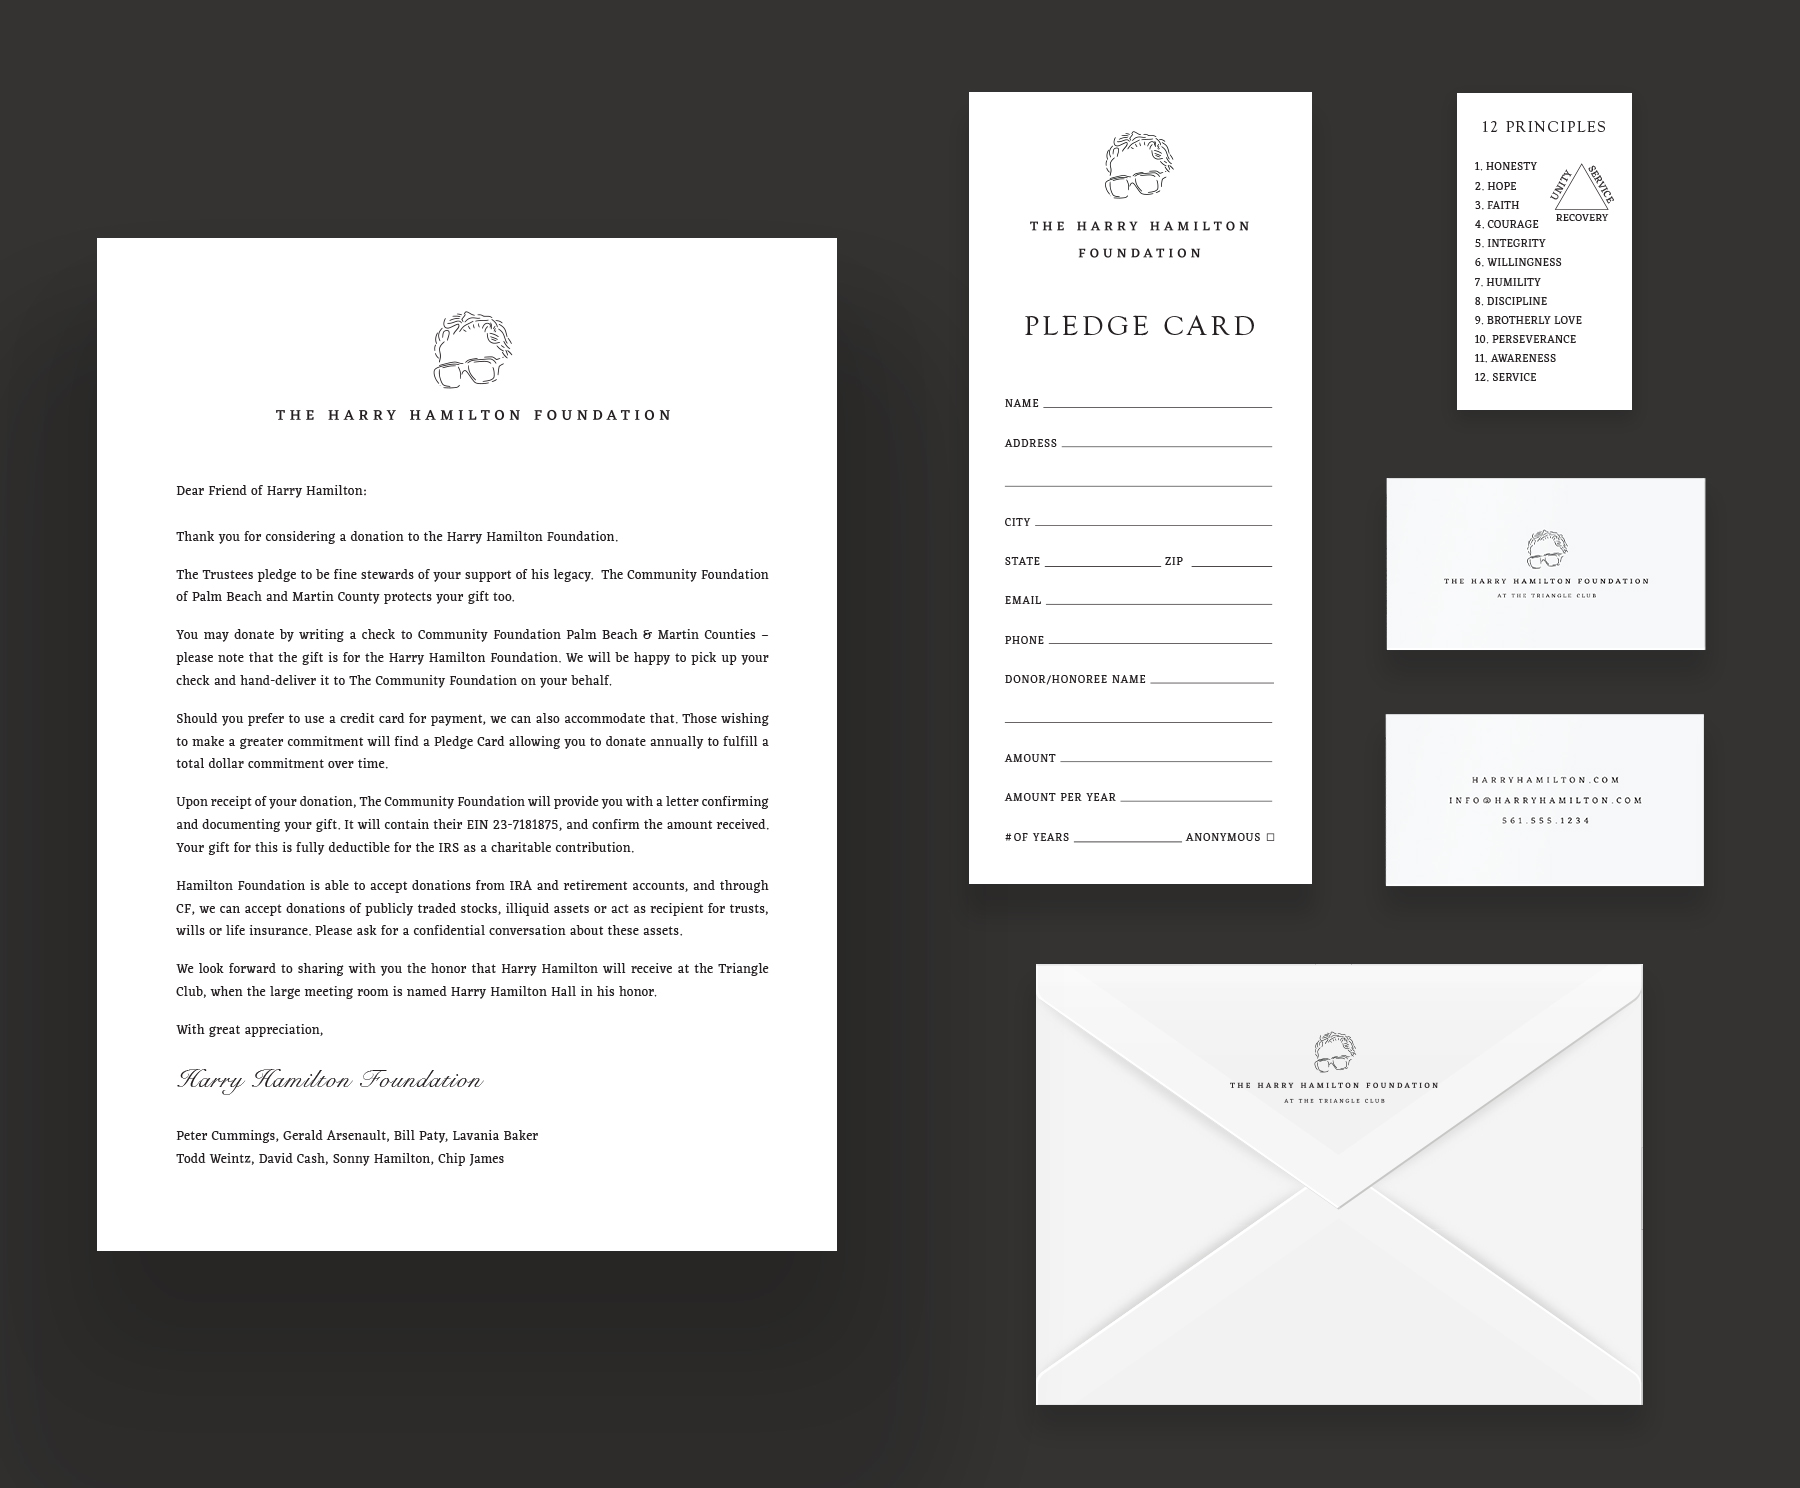 Harry Hamilton Foundation stationary suite featuring branded letterhead, business cards, and a pledge card on white paper with black type with featured against a black background.